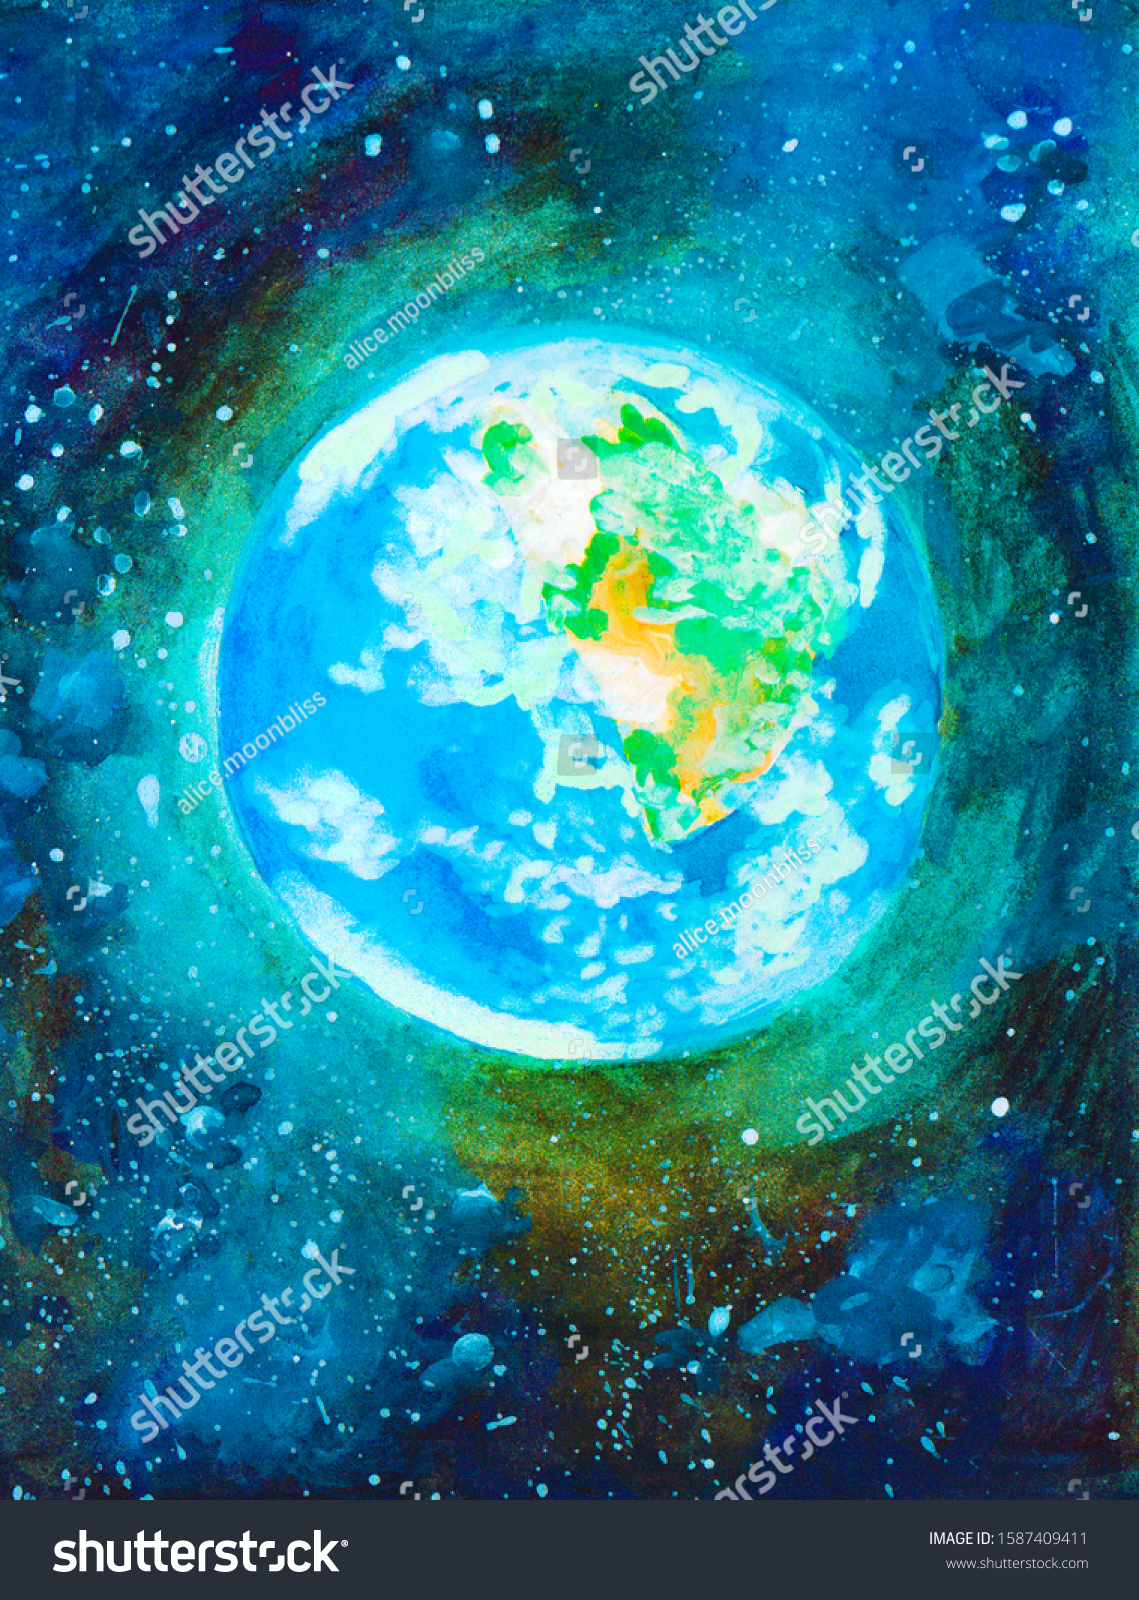 Image Planet Earth Space Jpeg Watercolor Stock Illustration